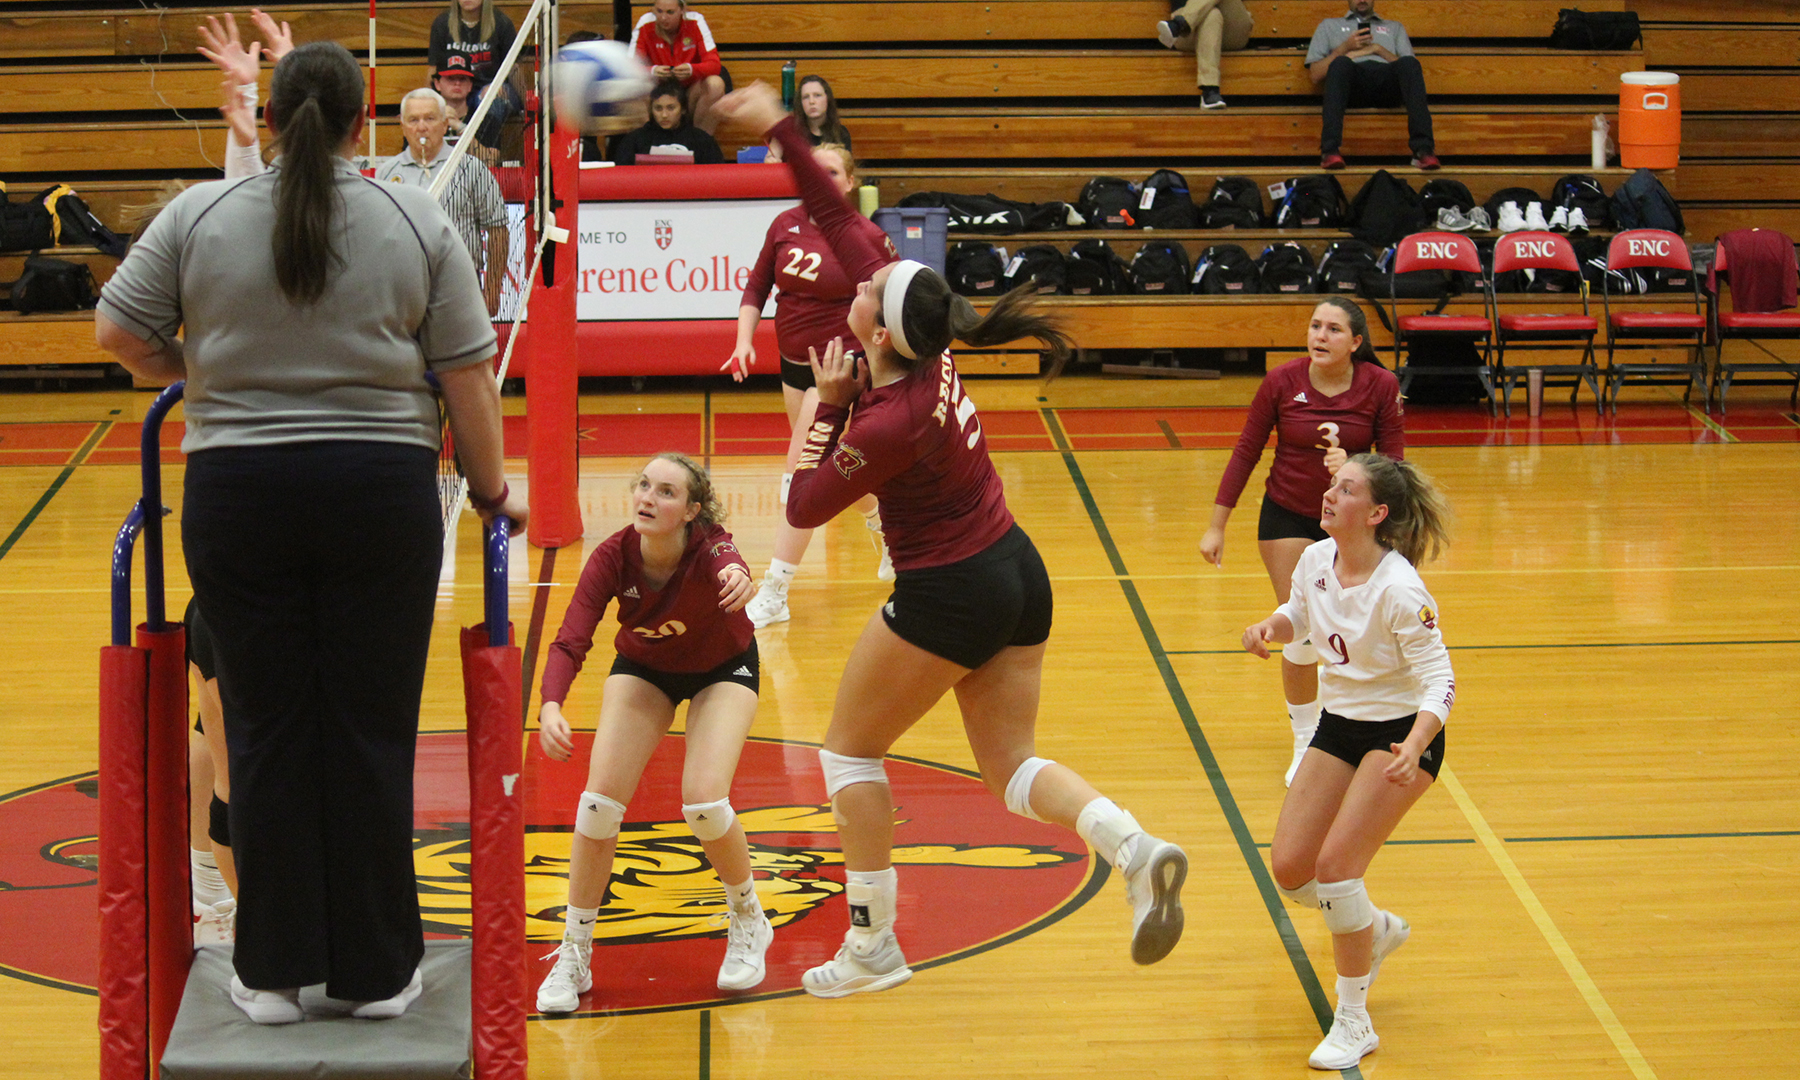 Women’s Volleyball Loses Friday Match at ENC Invitational